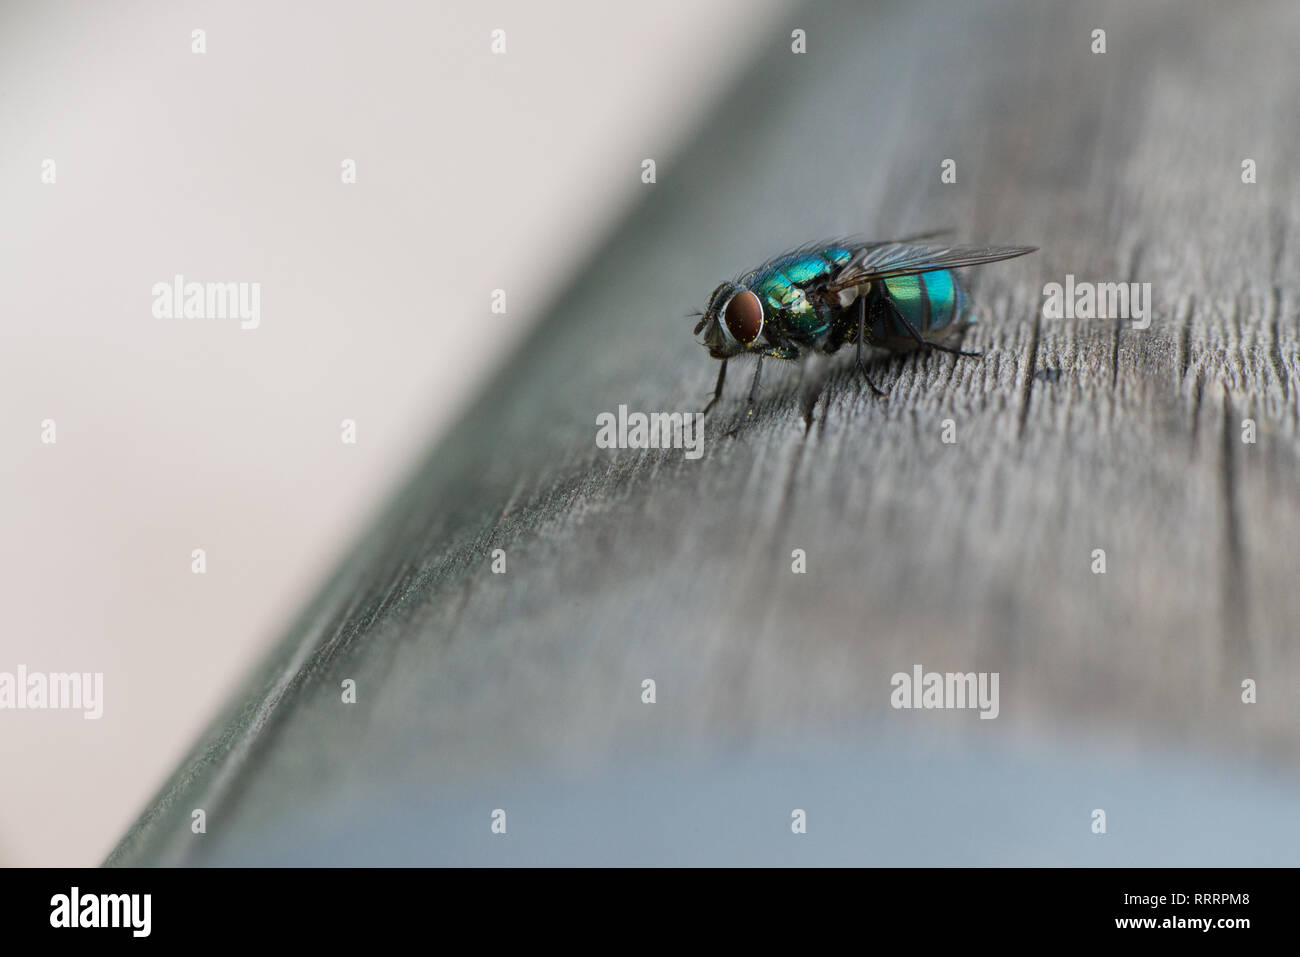 A greenbottle fly, Lucilia sericata, is a blow fly with brilliant, metallic, blue green colour. Close-up of tiny diptera, macro photography of flies. Stock Photo